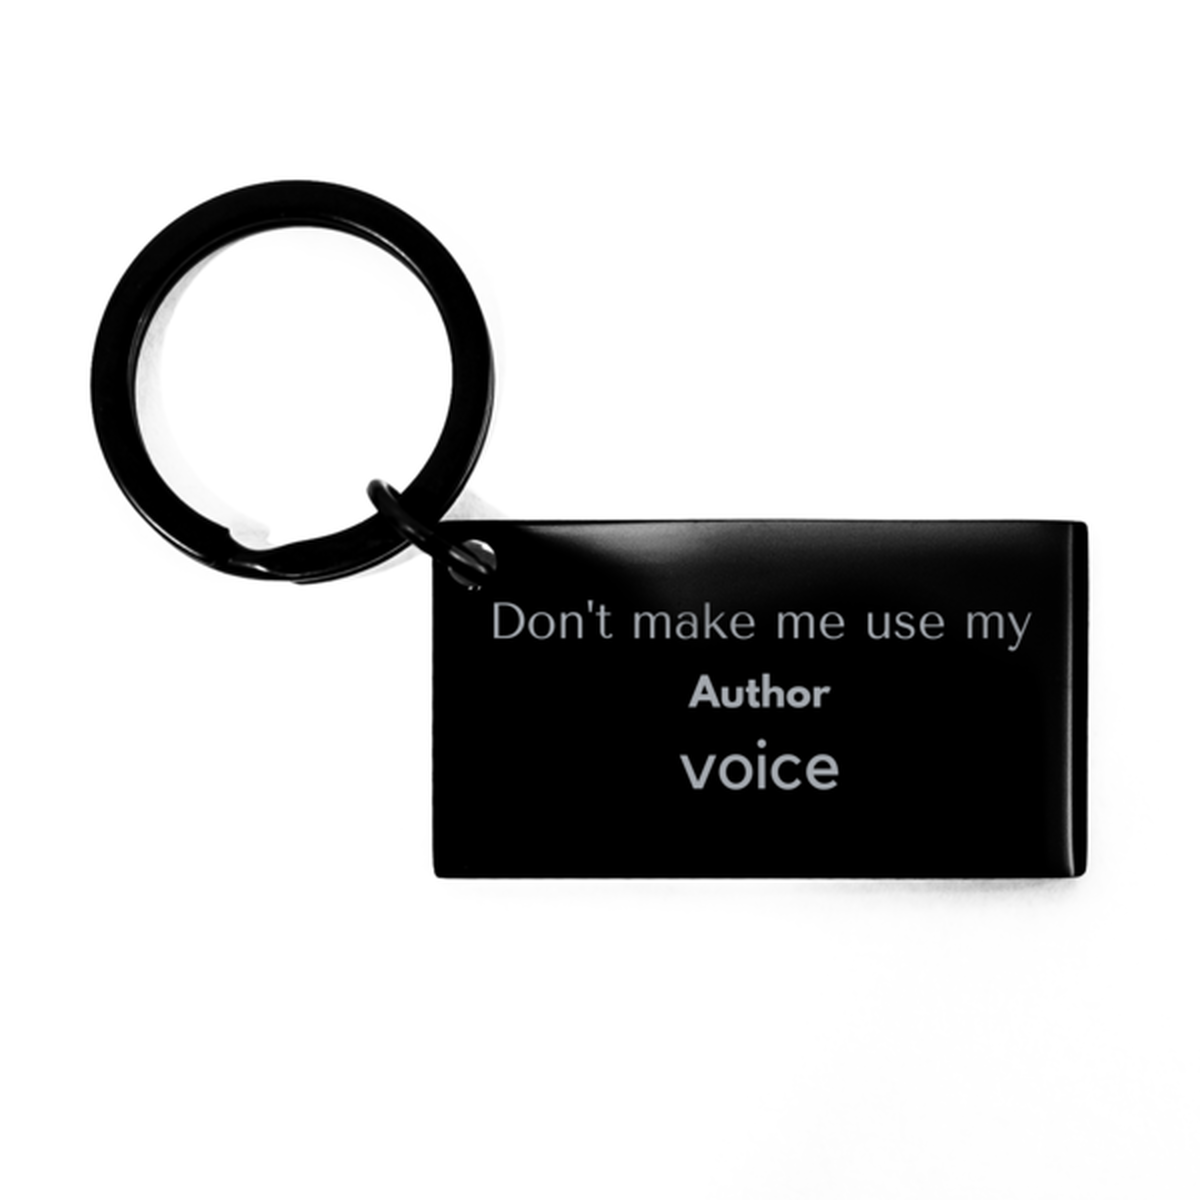 Don't make me use my Author voice, Sarcasm Author Gifts, Christmas Author Keychain Birthday Unique Gifts For Author Coworkers, Men, Women, Colleague, Friends